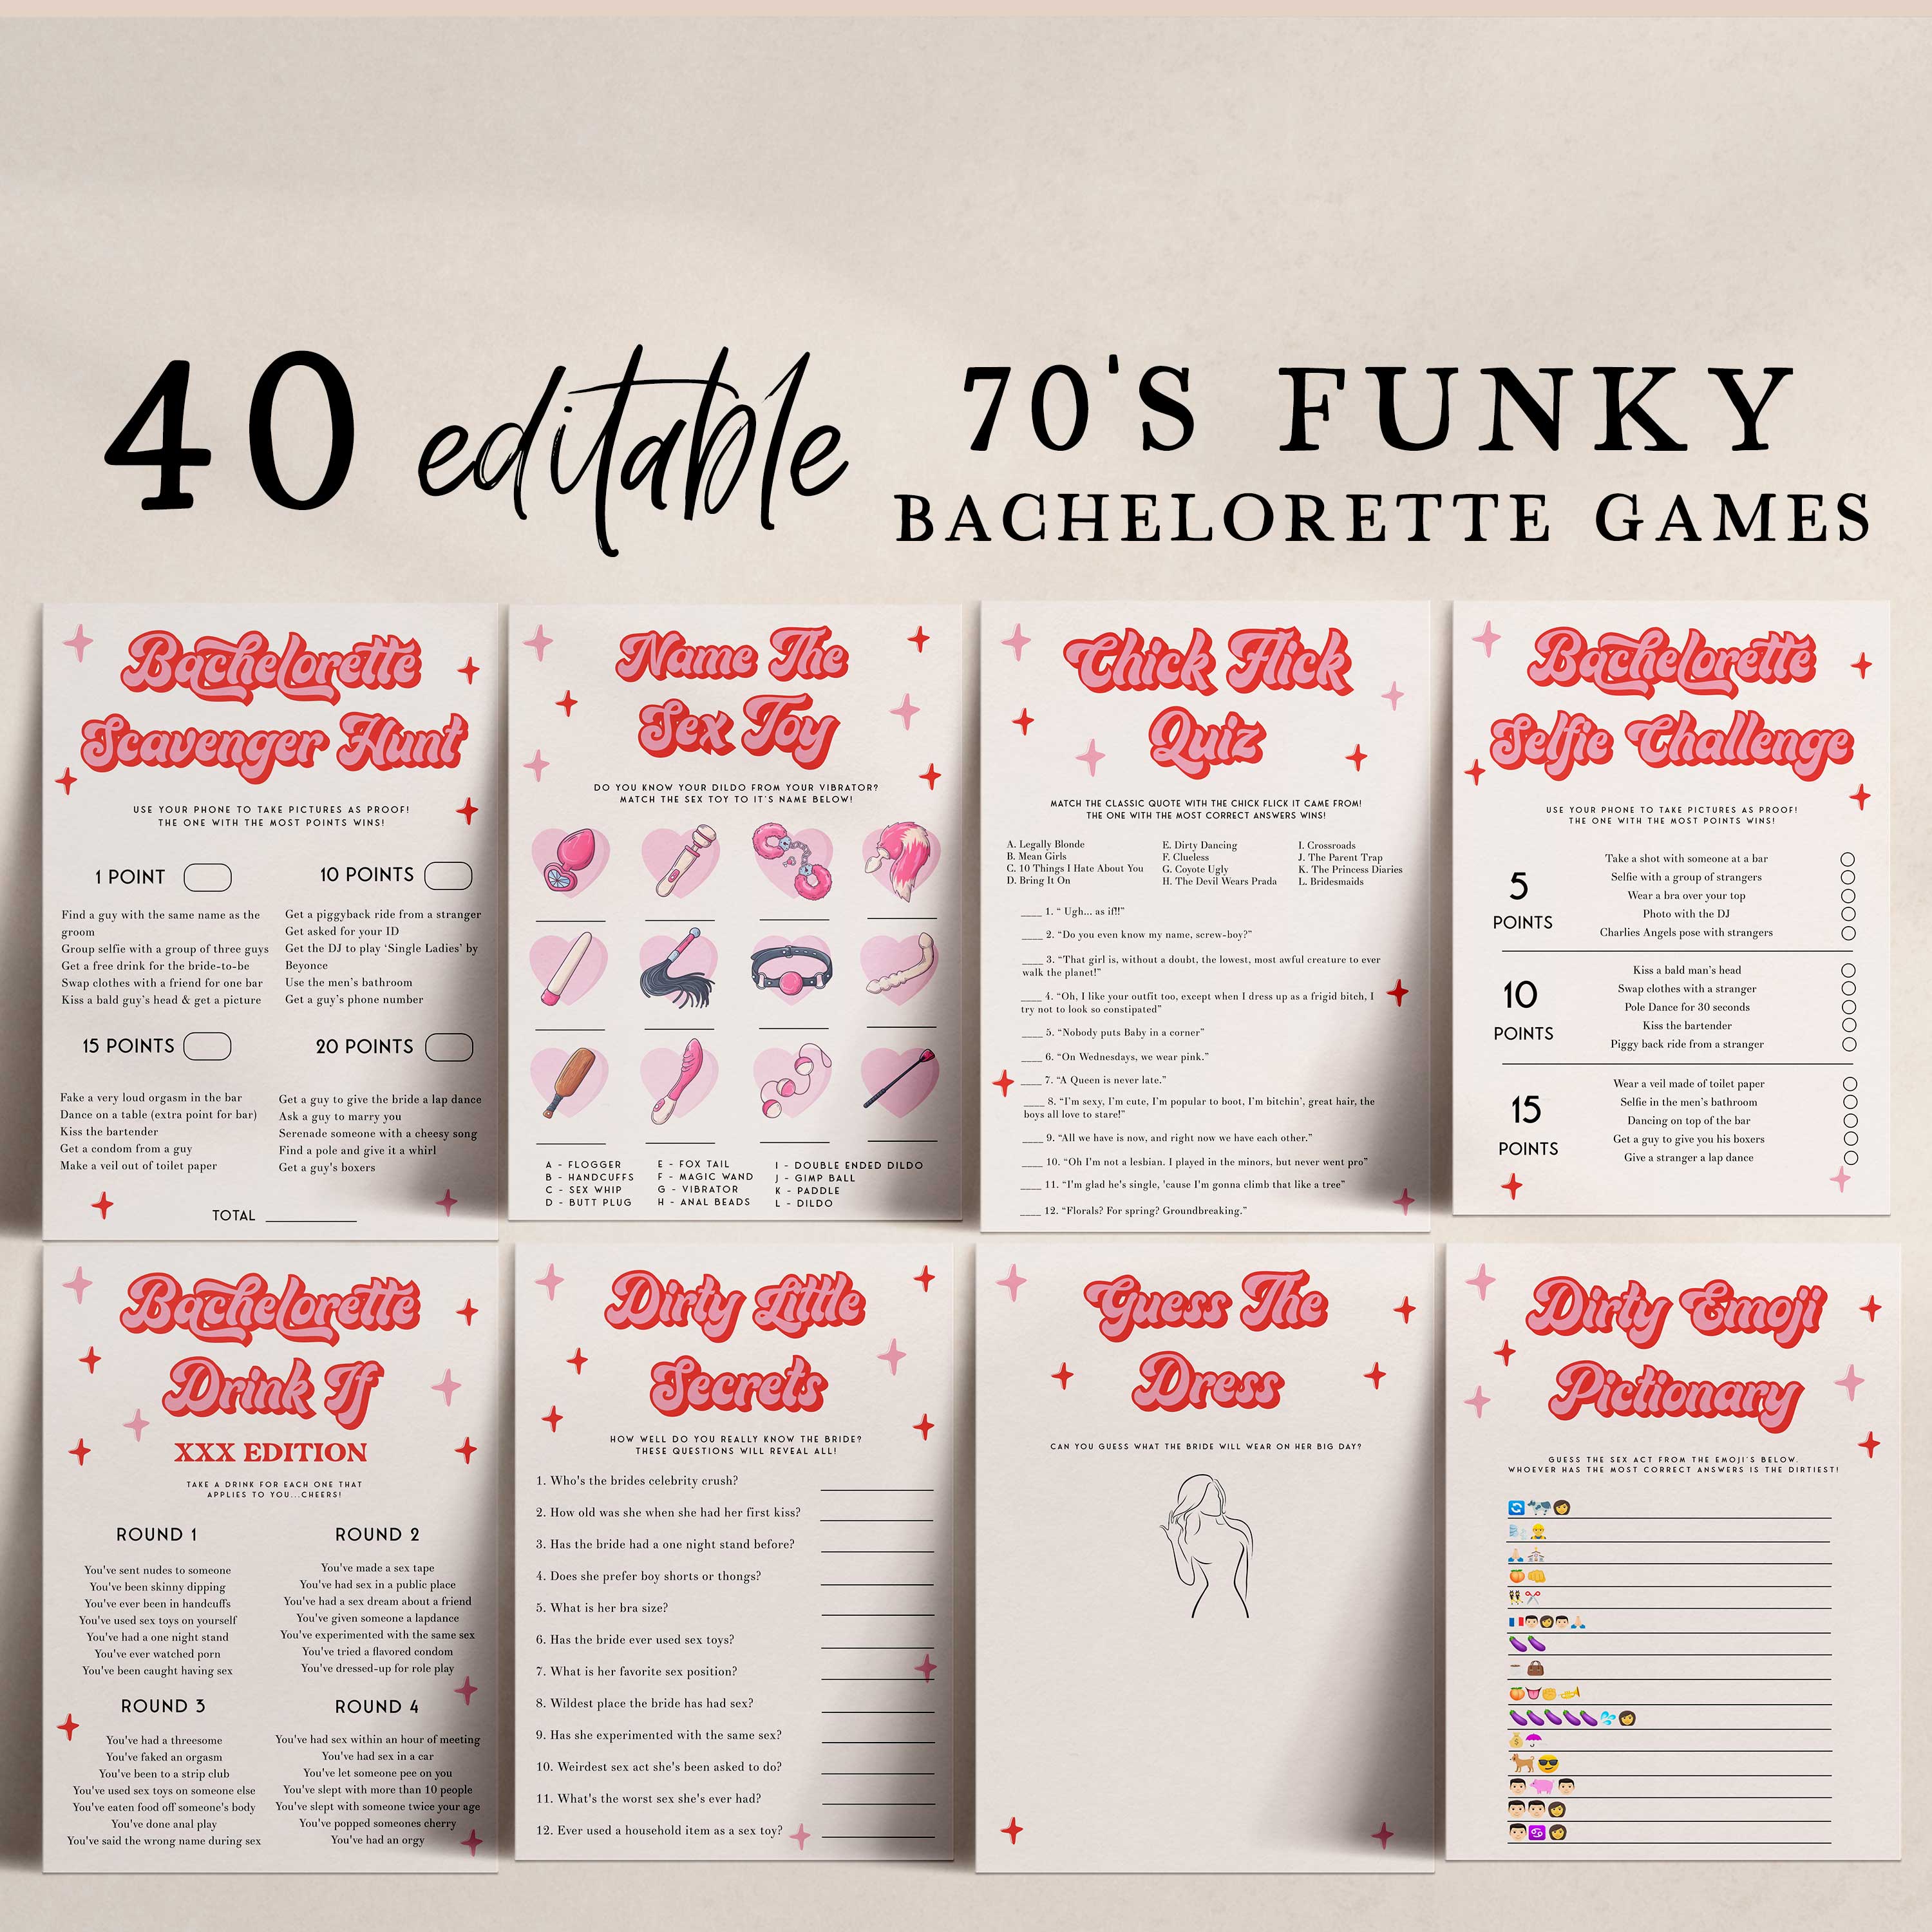 70s retro 40 editable bachelorette games including answers where applicable